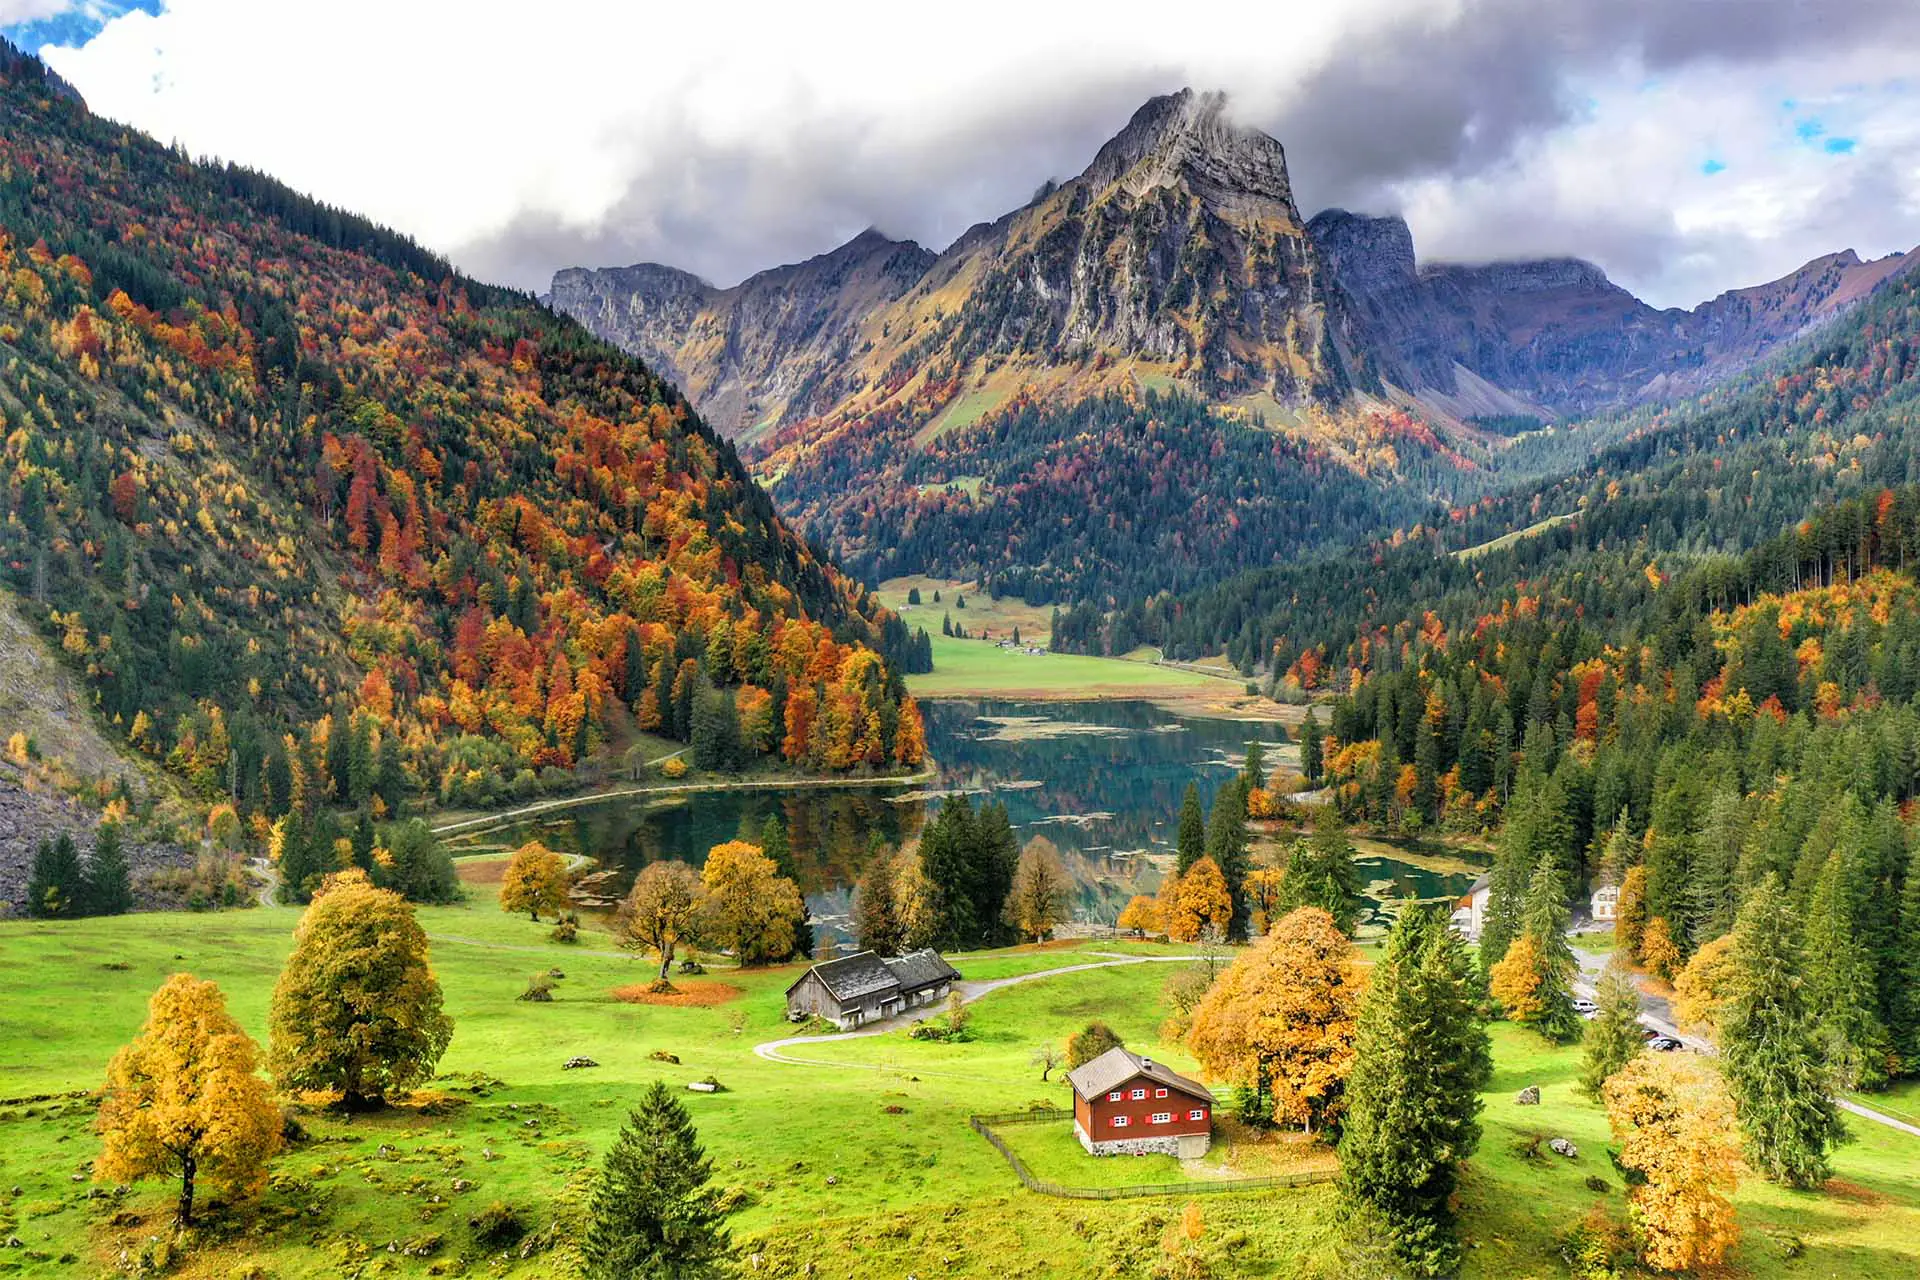 Lake Obersee is located in the Glarus Alps and just 1h away from Zurich.